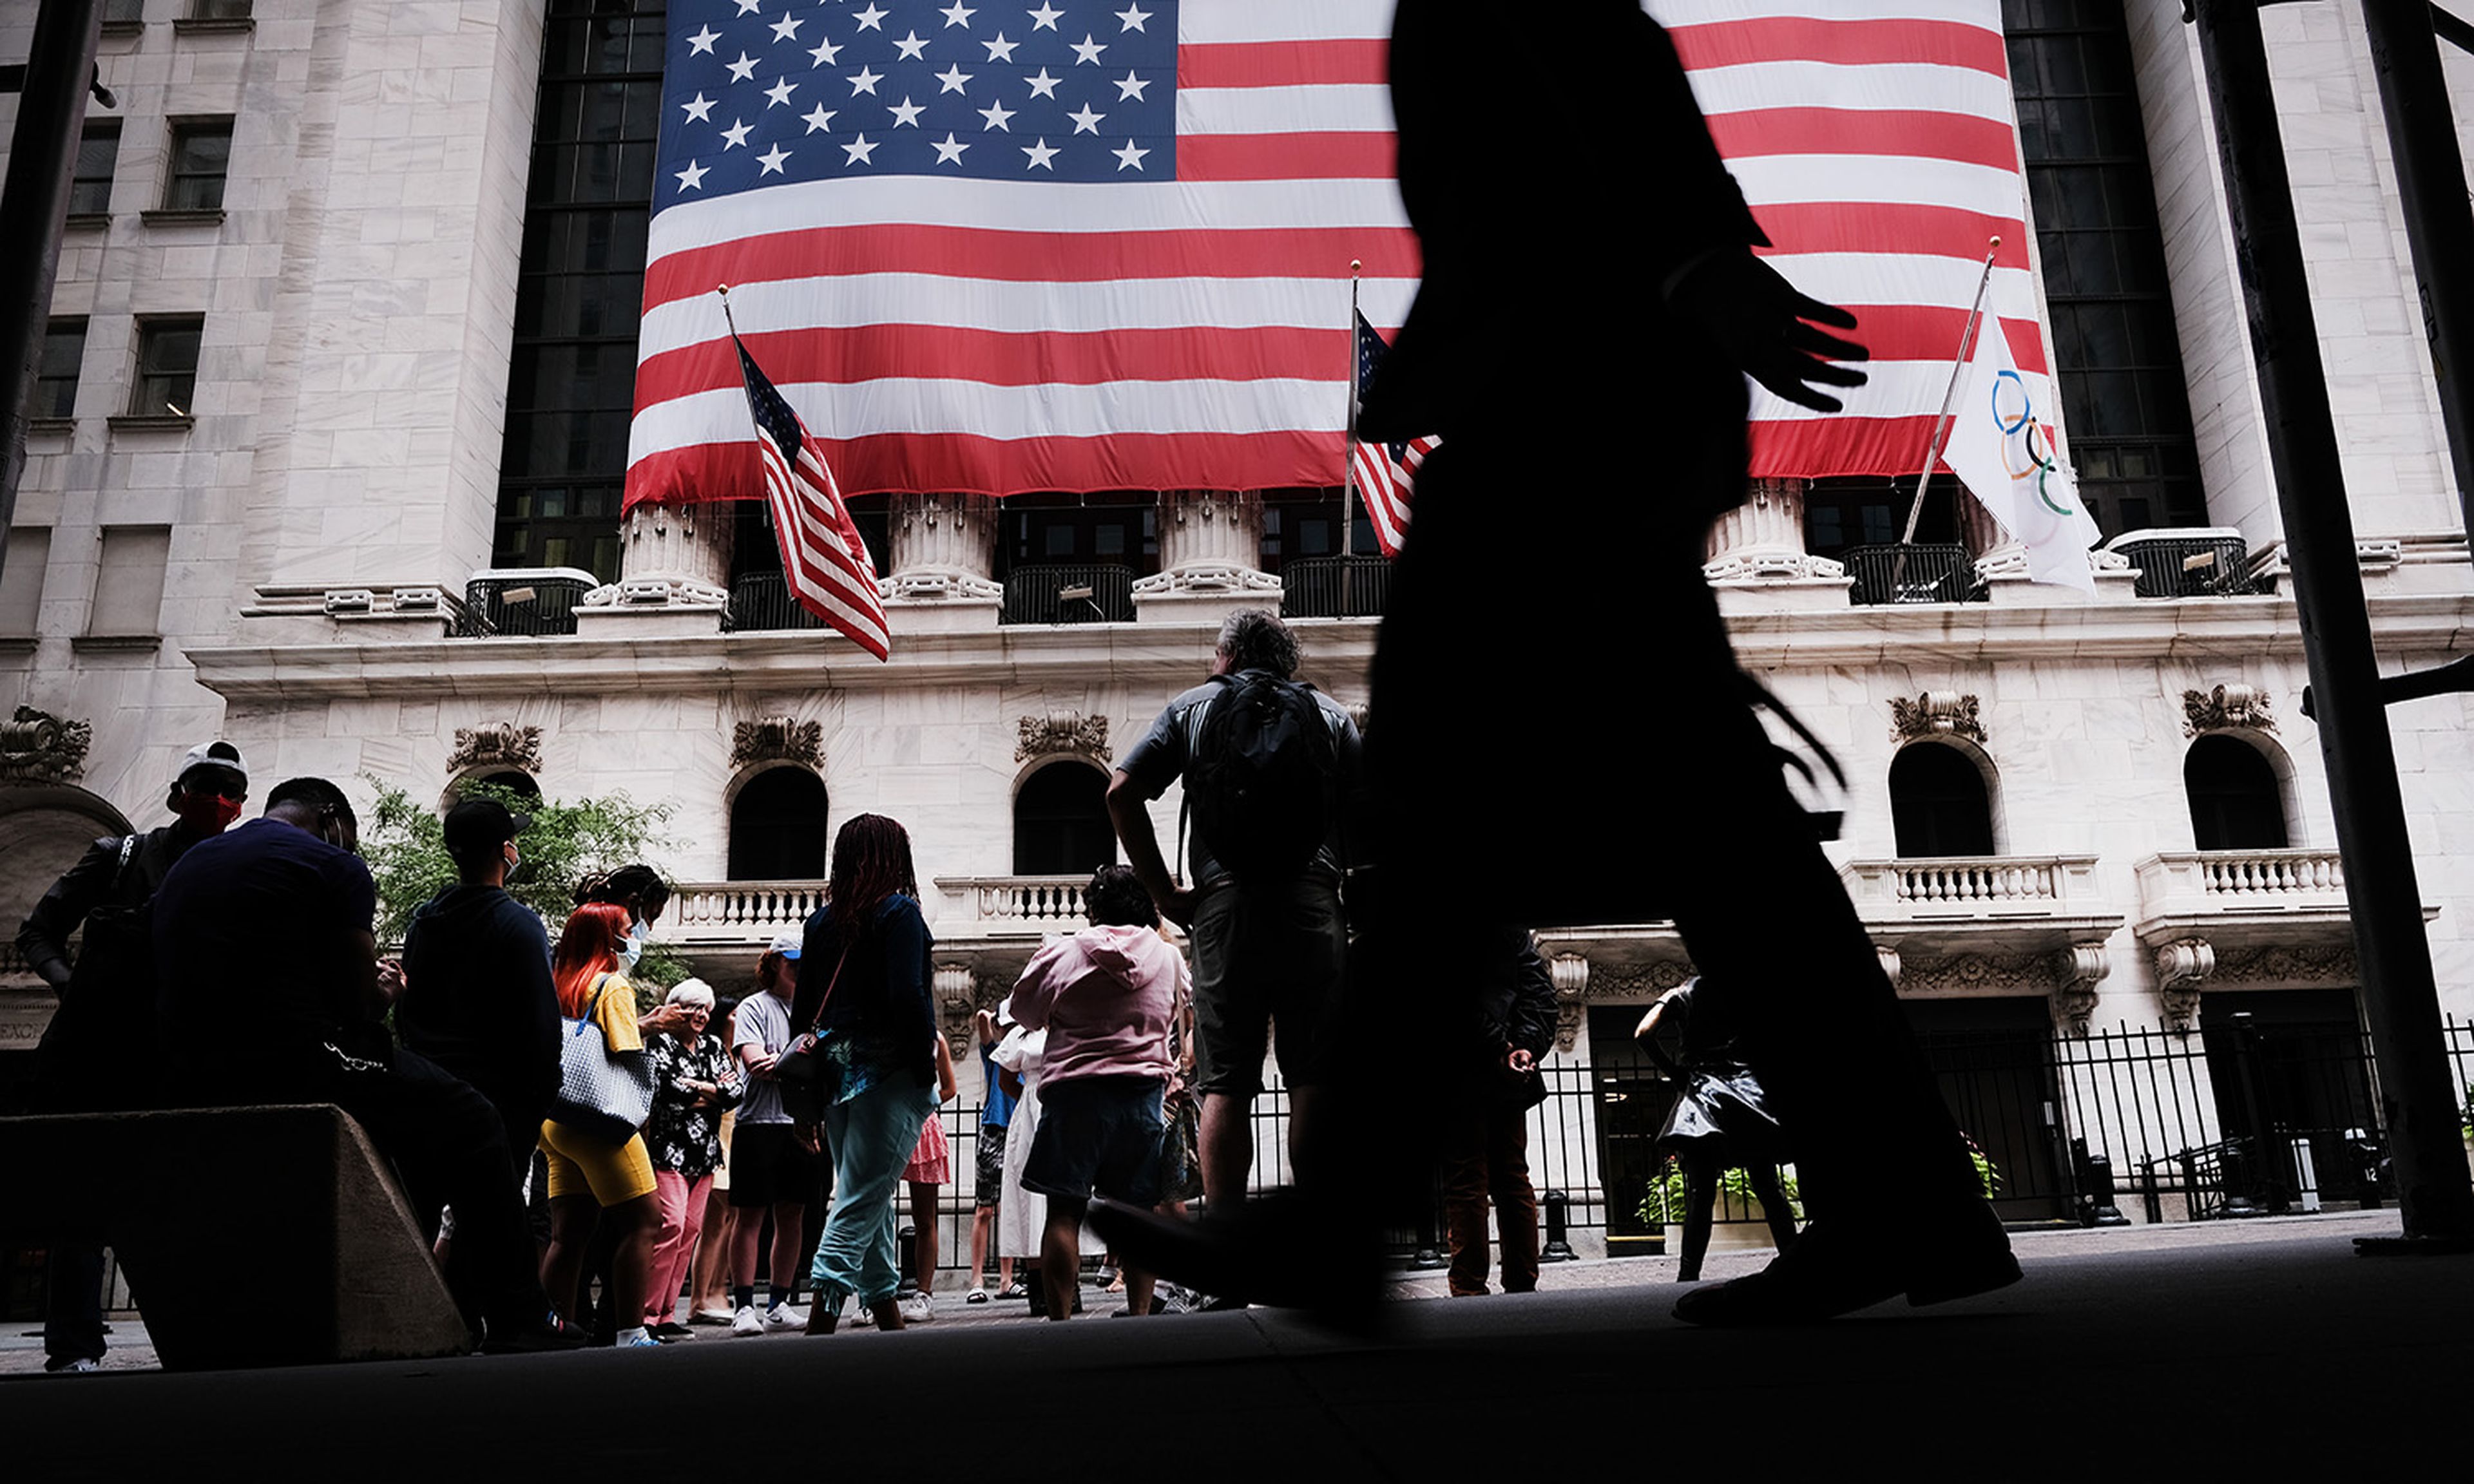 People walk by the New York Stock Exchange on Aug. 10, 2021, in New York City. (Photo by Spencer Platt/Getty Images)